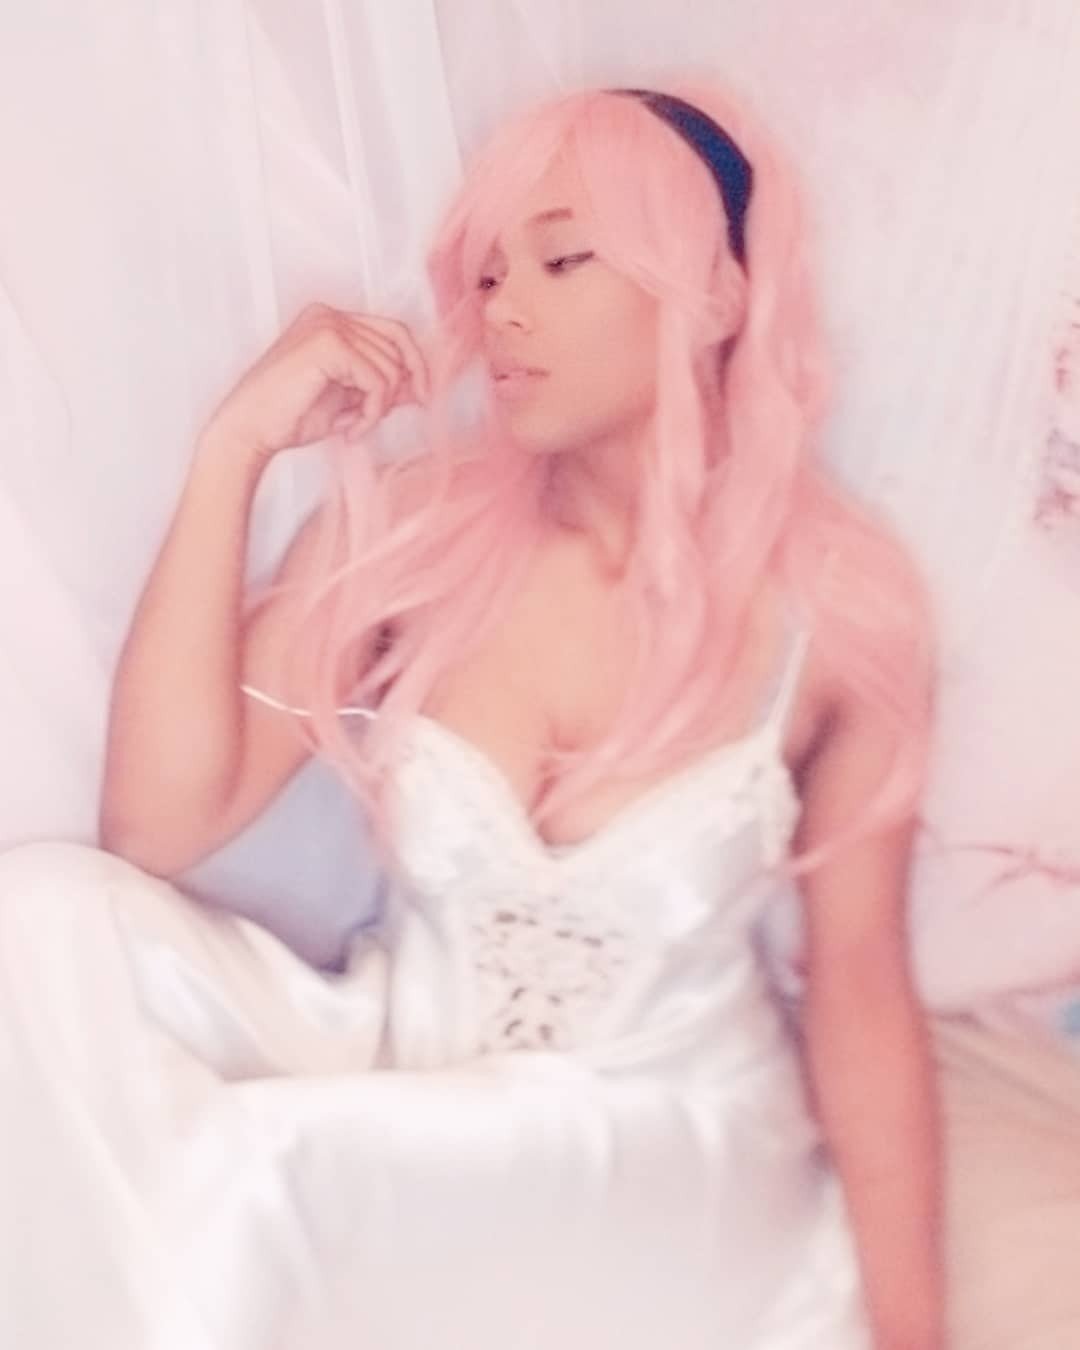 Photo by Yuki Izanami with the username @PrincessYuki, who is a star user,  September 21, 2020 at 9:47 PM and the text says '☁️ Midnight Dreaming ☁️
*
*
*
#blackgirlsarekawaii #pinkaesthetic #fairycore #aesthetic #selfie #photography #ａｅｓｔｈｅｔｉｃ #cosplay #kawaii #pink #vintageclothing #vintage'